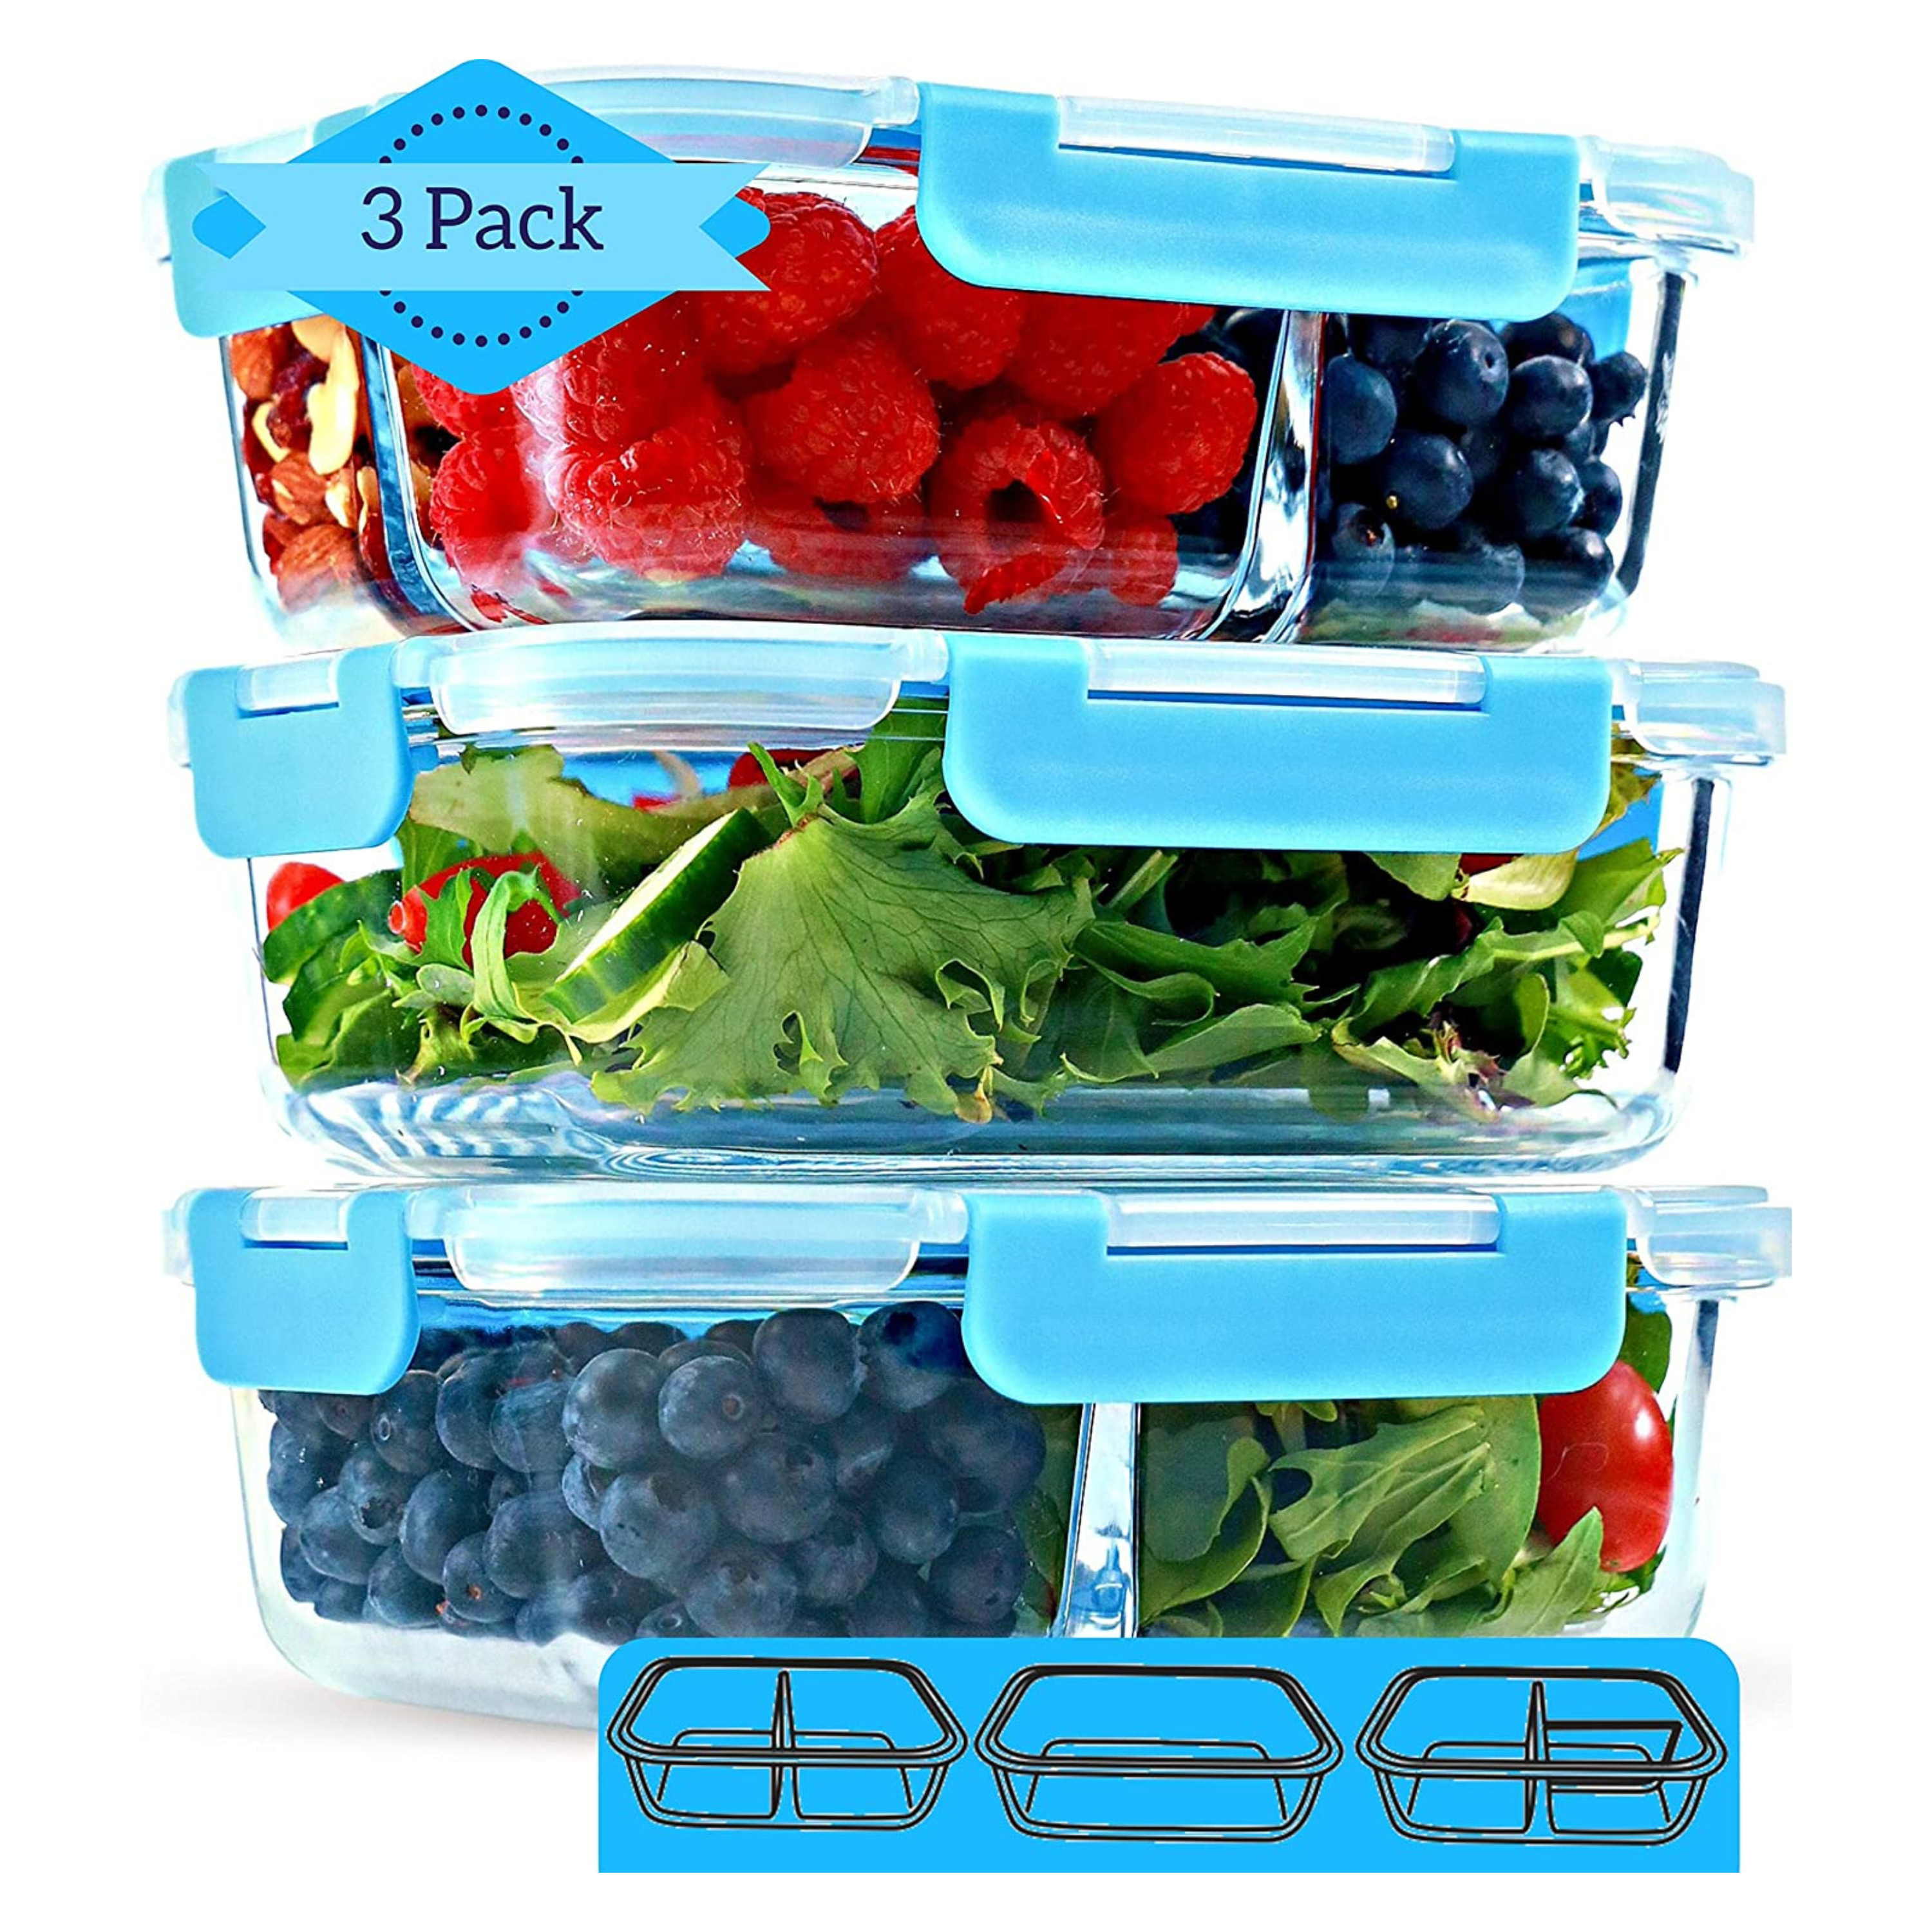 12 Meal Prep Containers 3 Compartment Plate W/ Lids Reusable Food